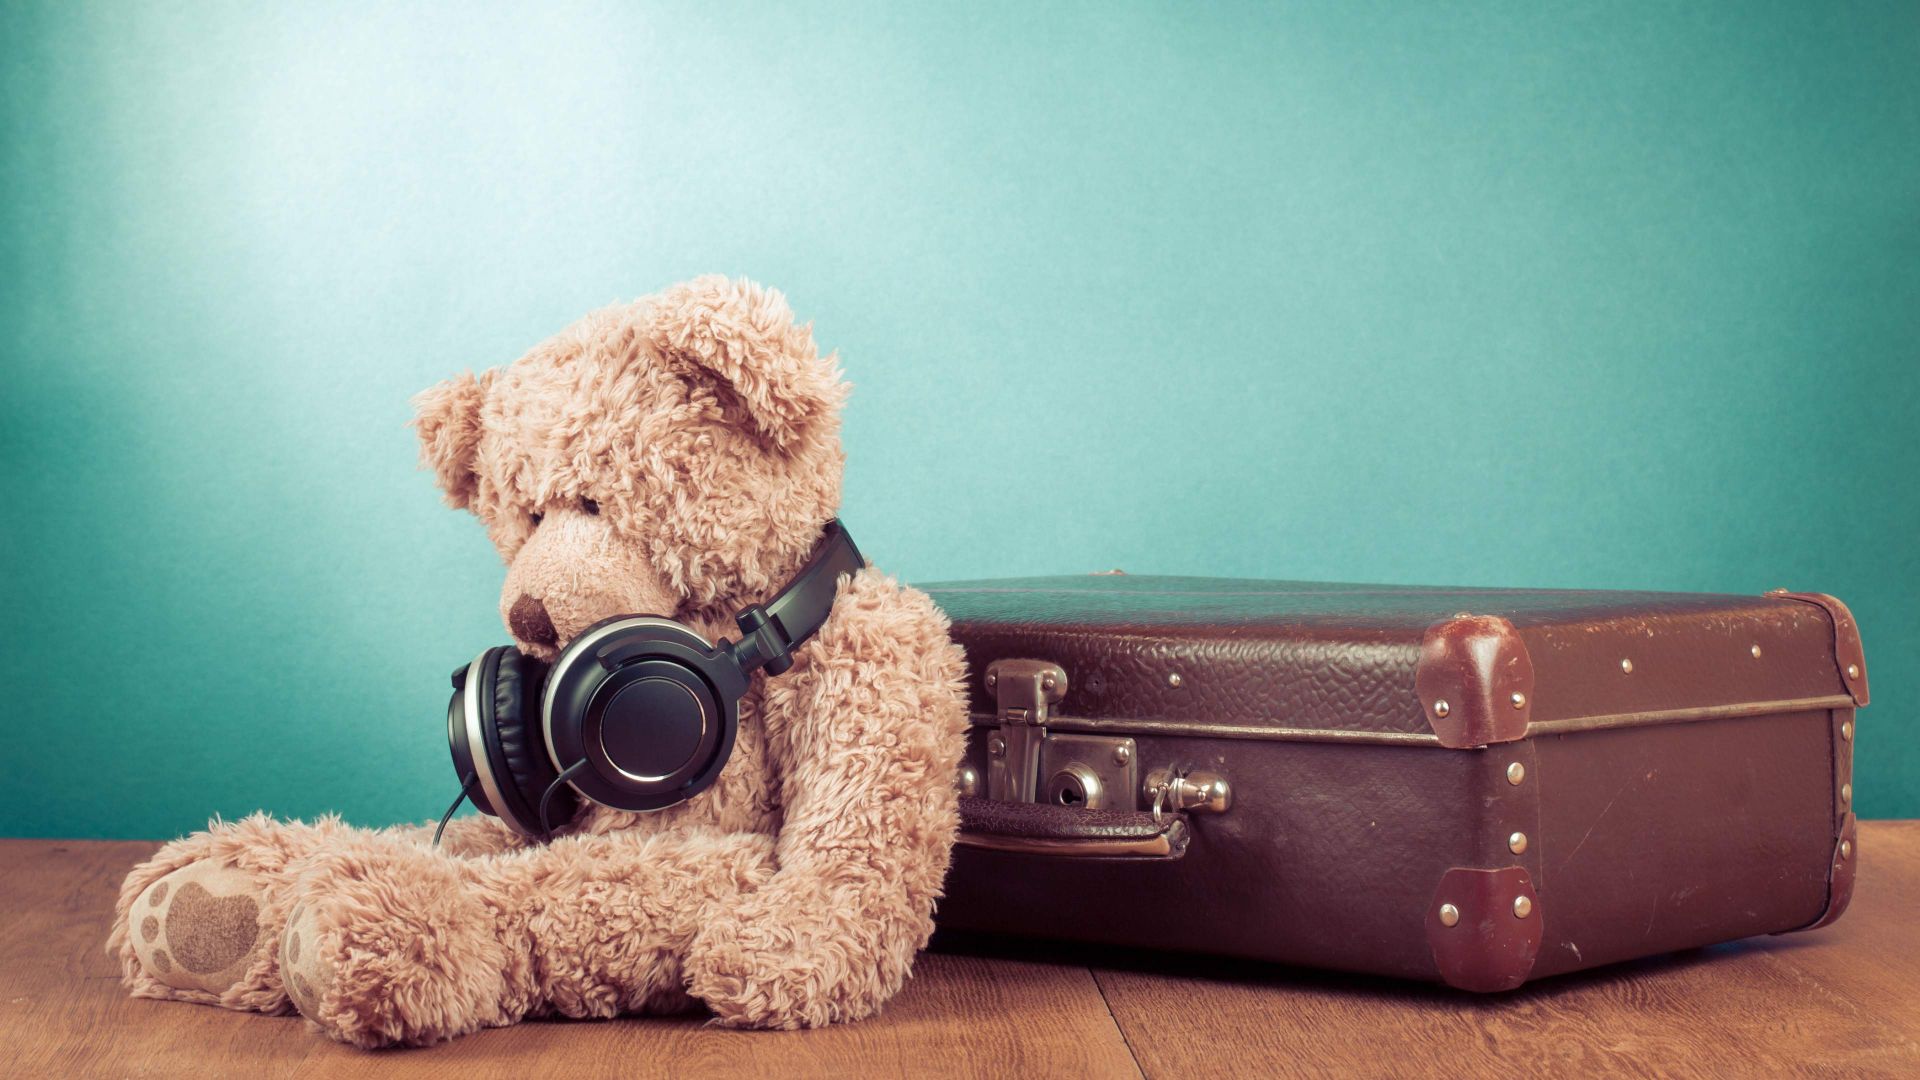 Desktop Wallpaper Teddy Bear, Briefcase, Head Phone, Toys, 4k, Hd Image,  Picture, Background, Gii8le